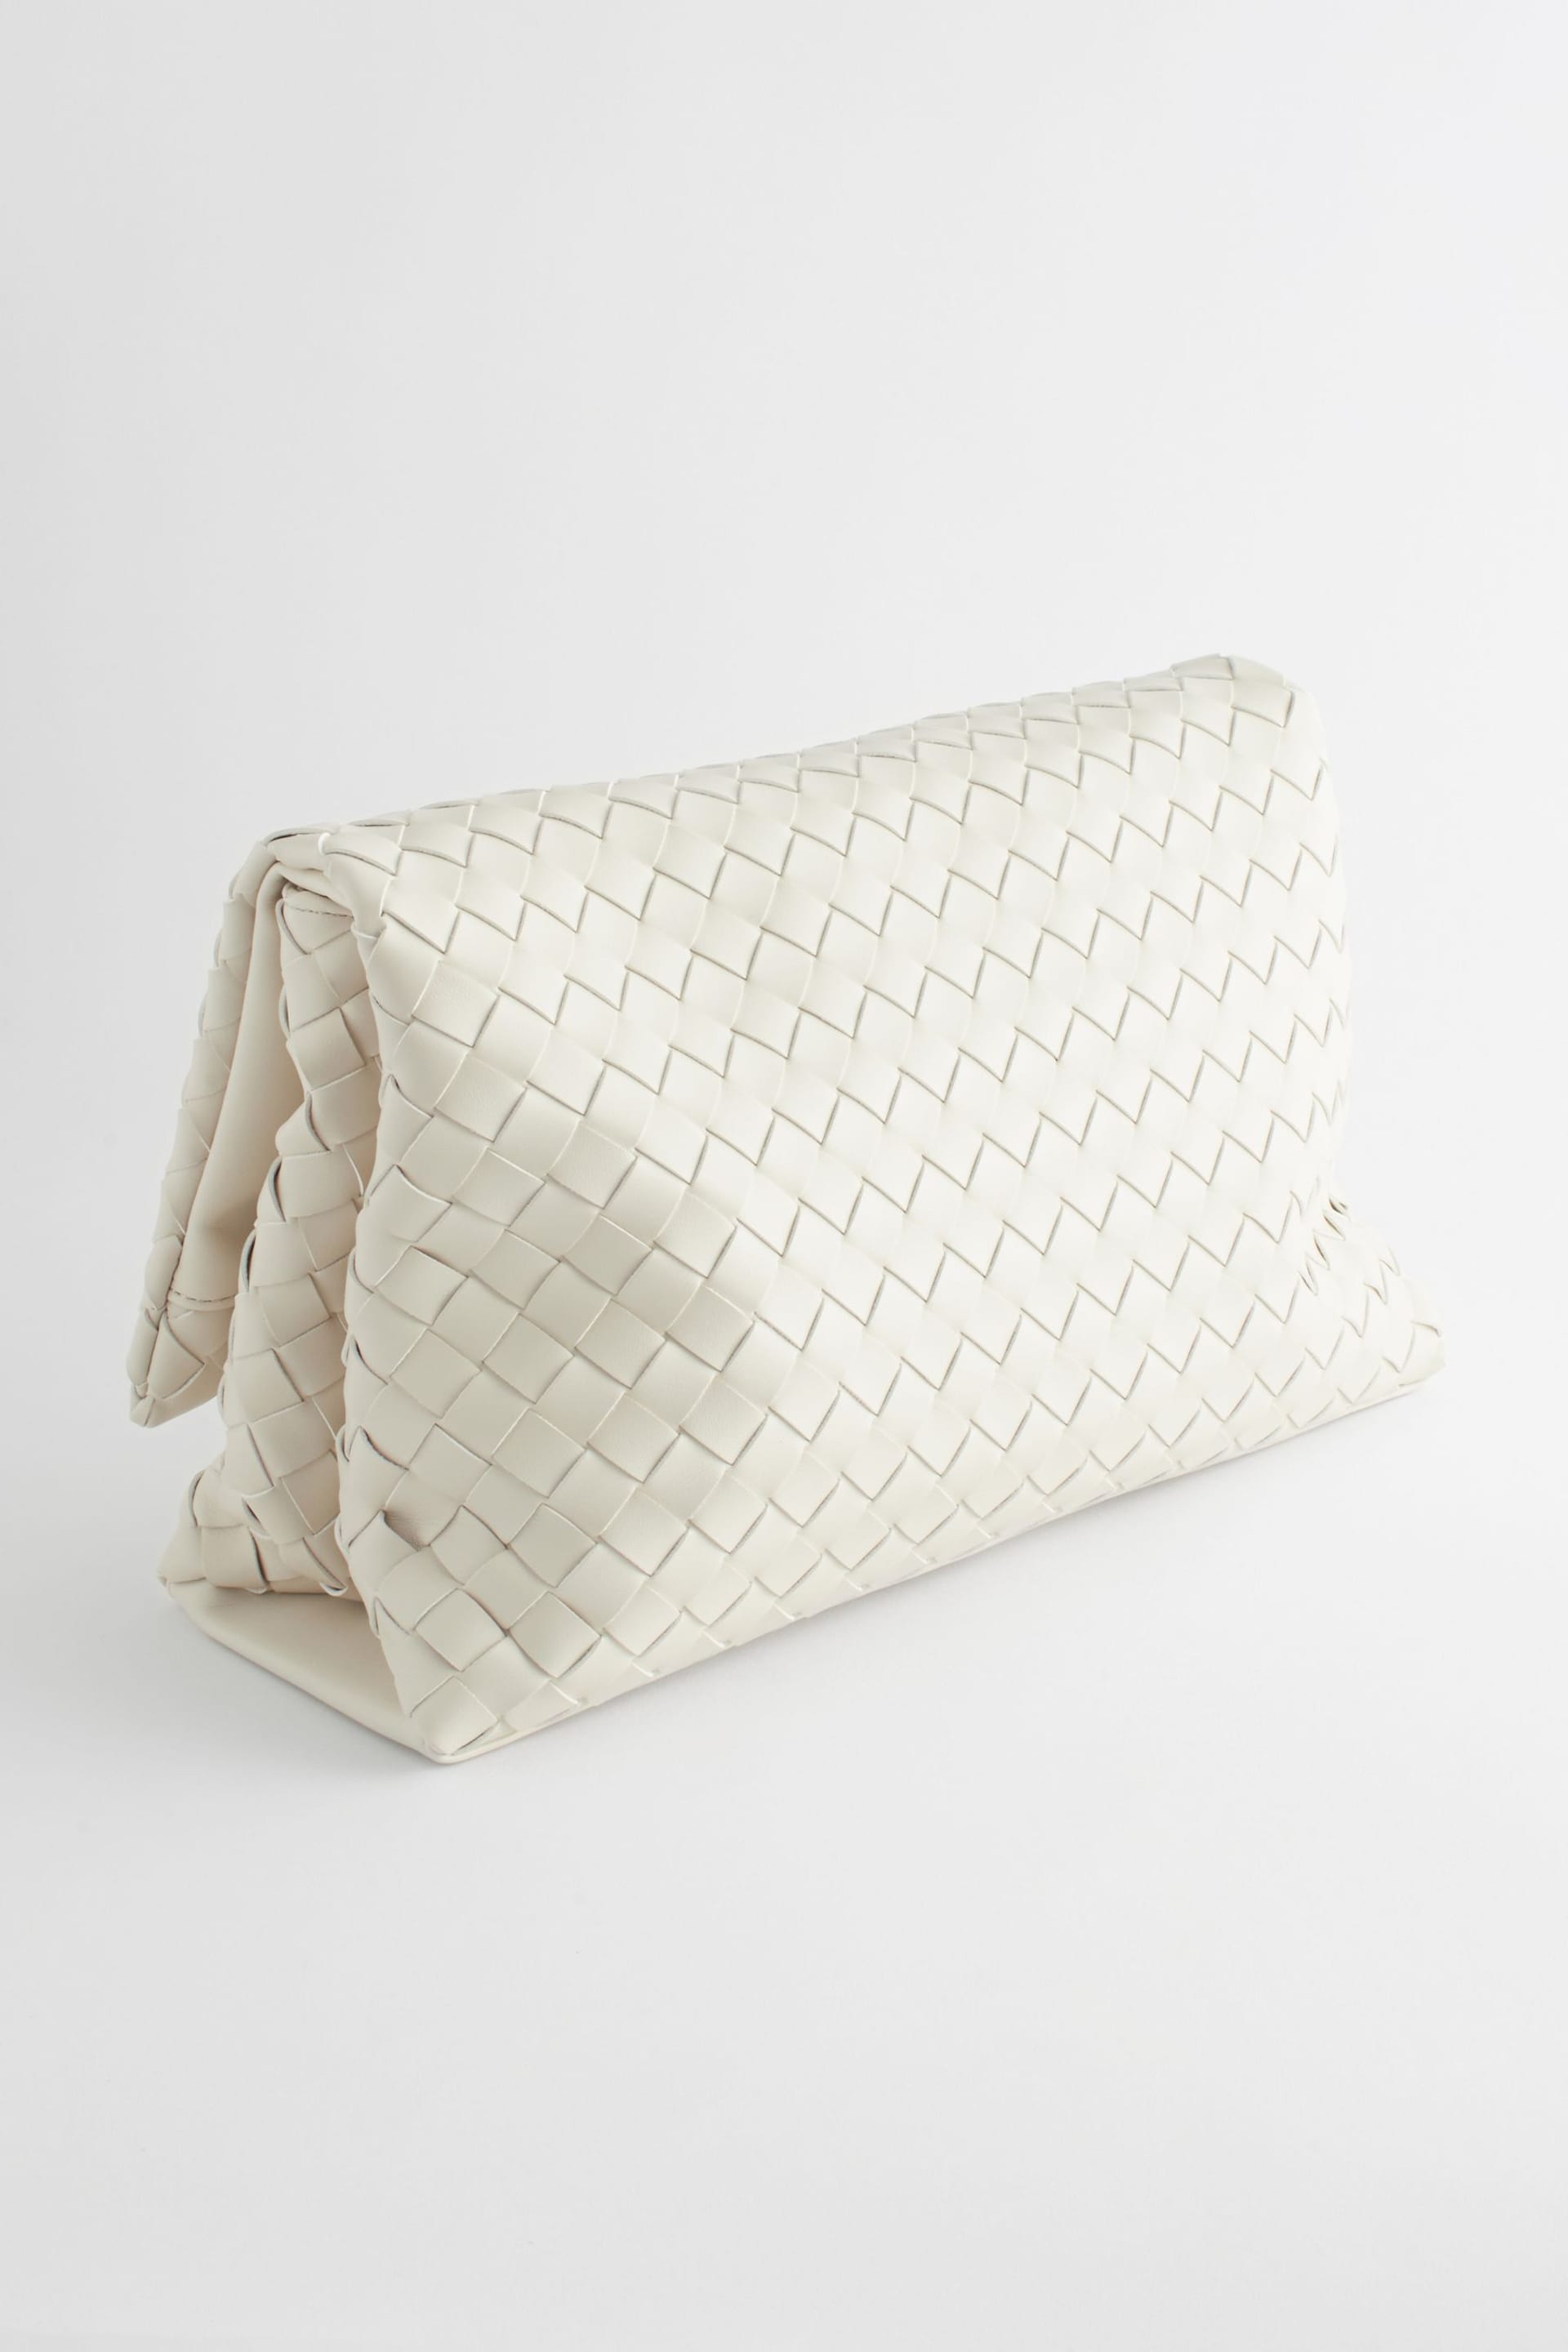 White Weave Clutch Bag - Image 5 of 9